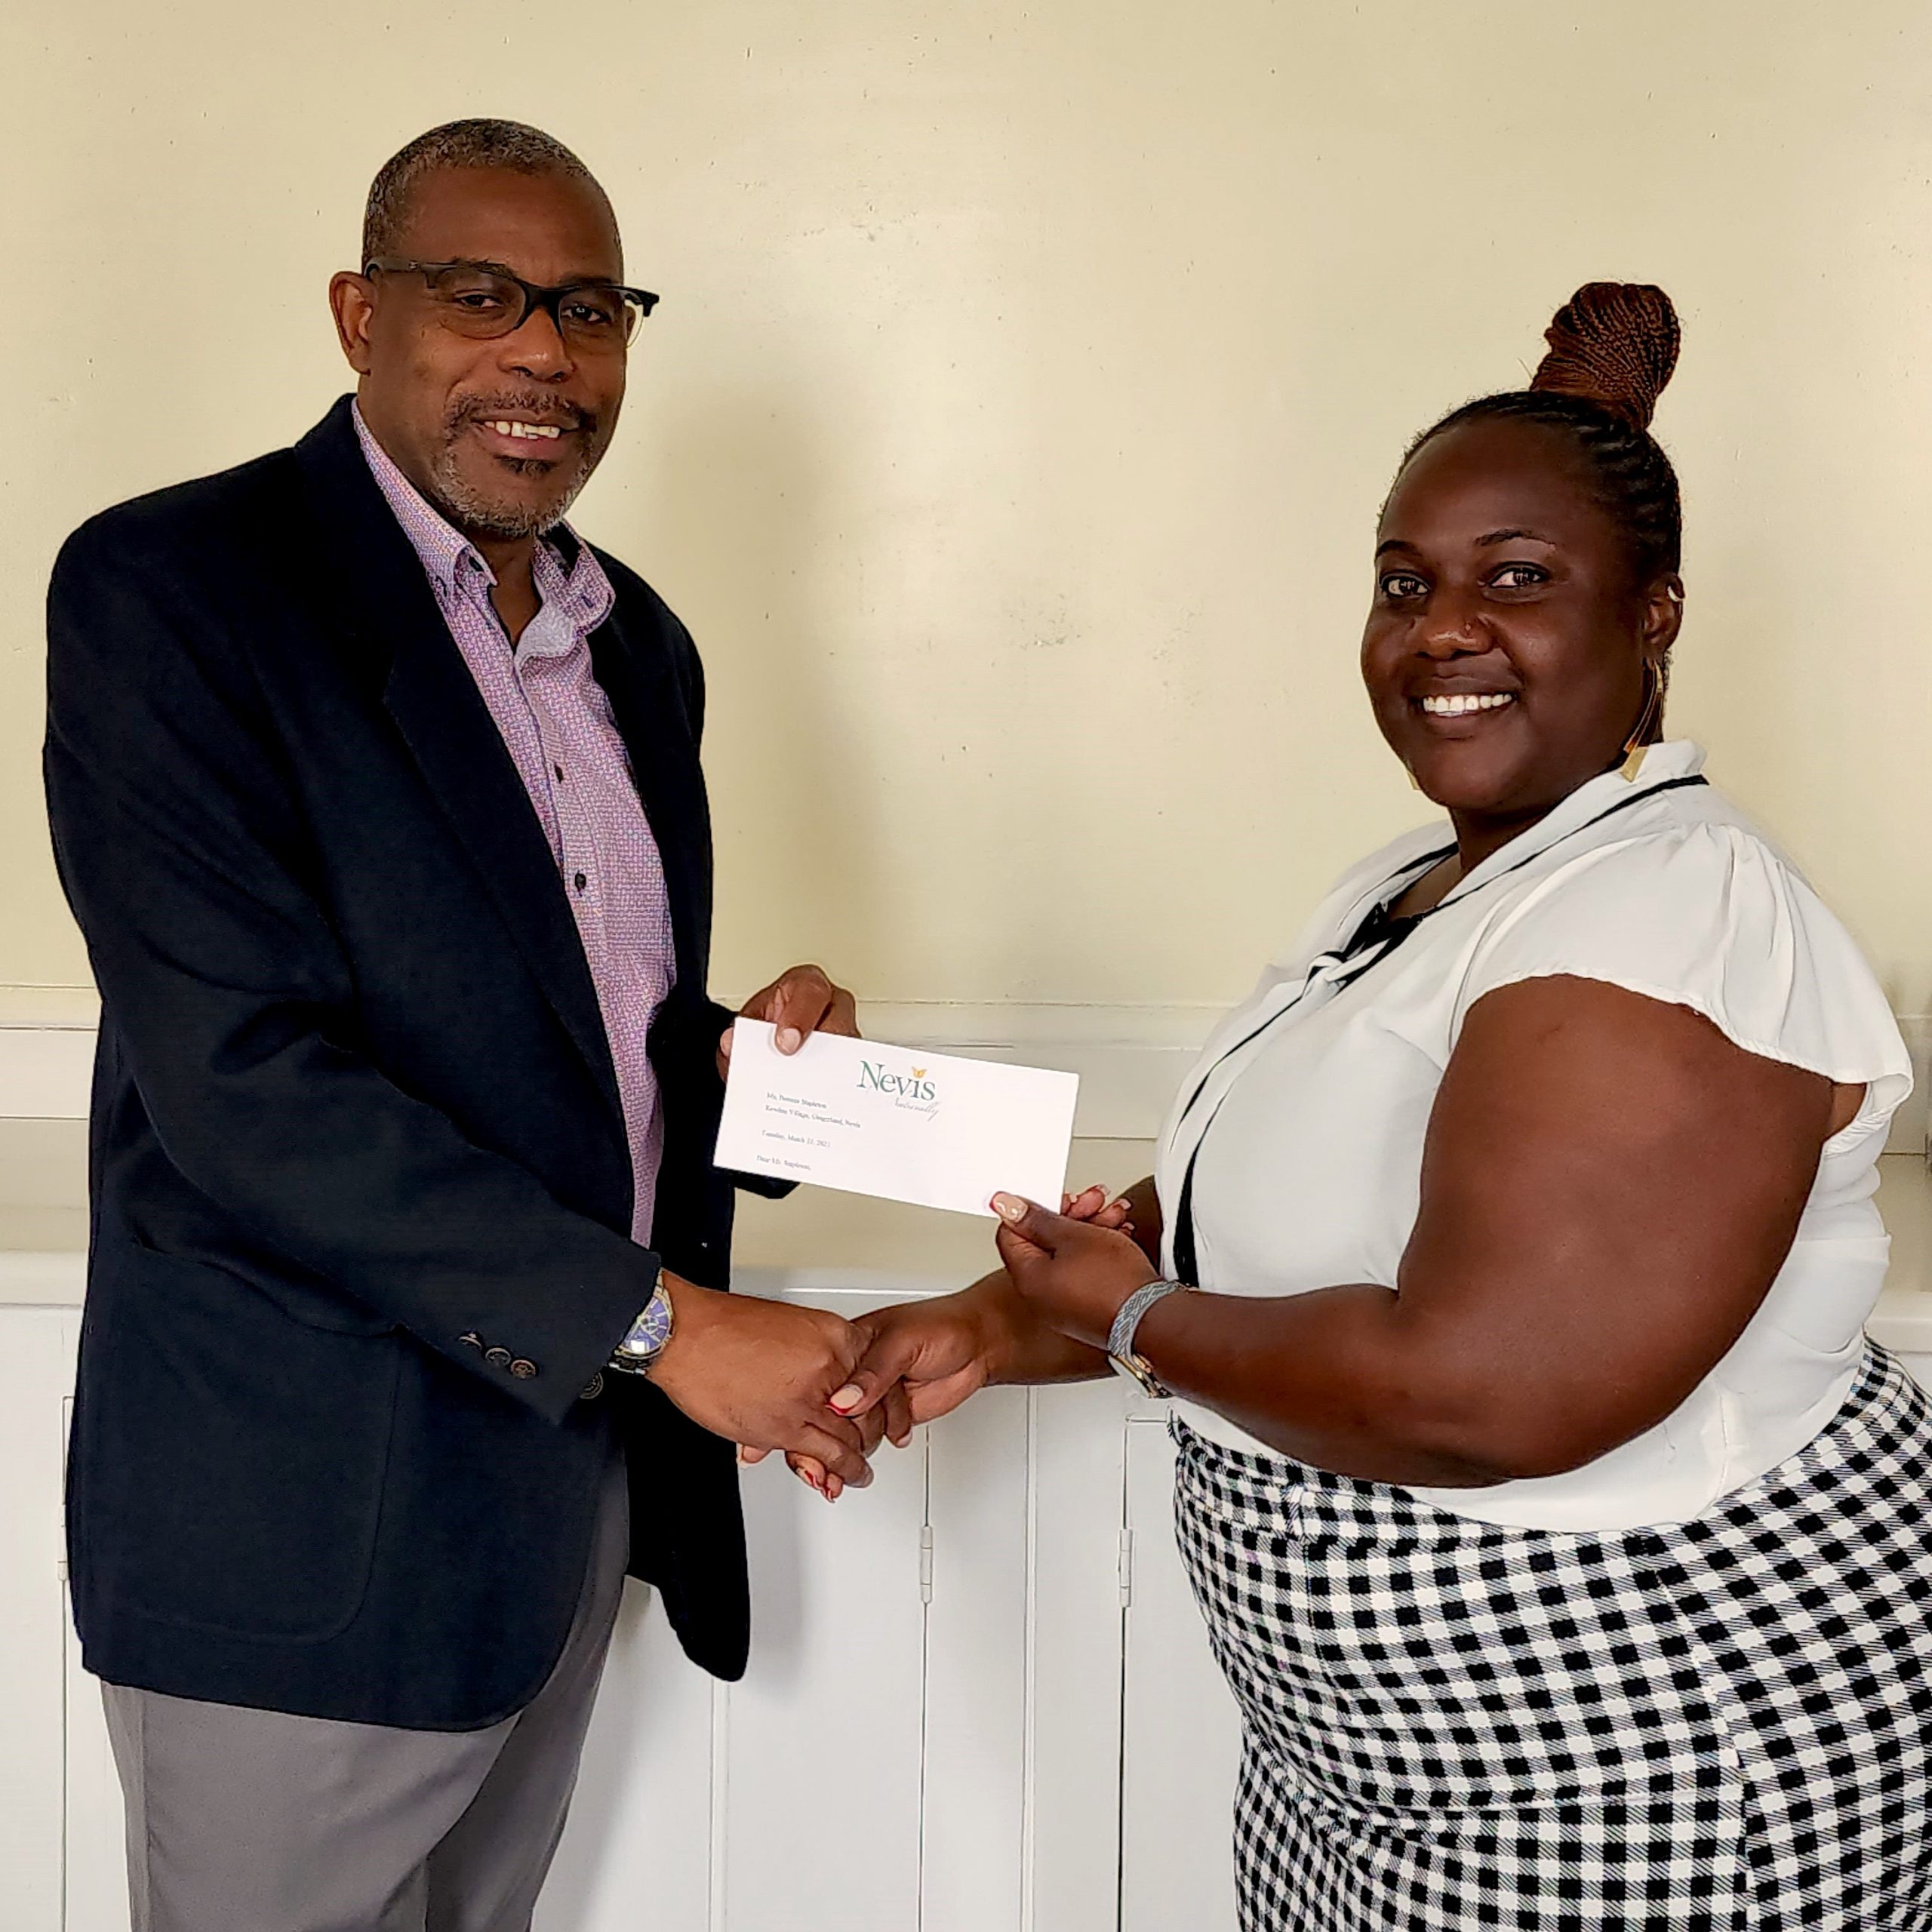 Mr. Devon Liburd, presents scholarship to Chef Berecia Stapleton of Gingerland, winner of the Nevis Tourism Authority NICHE Culinary Scholarship for study in Plant-Based Culinary Arts at the Le Cordon Bleu London